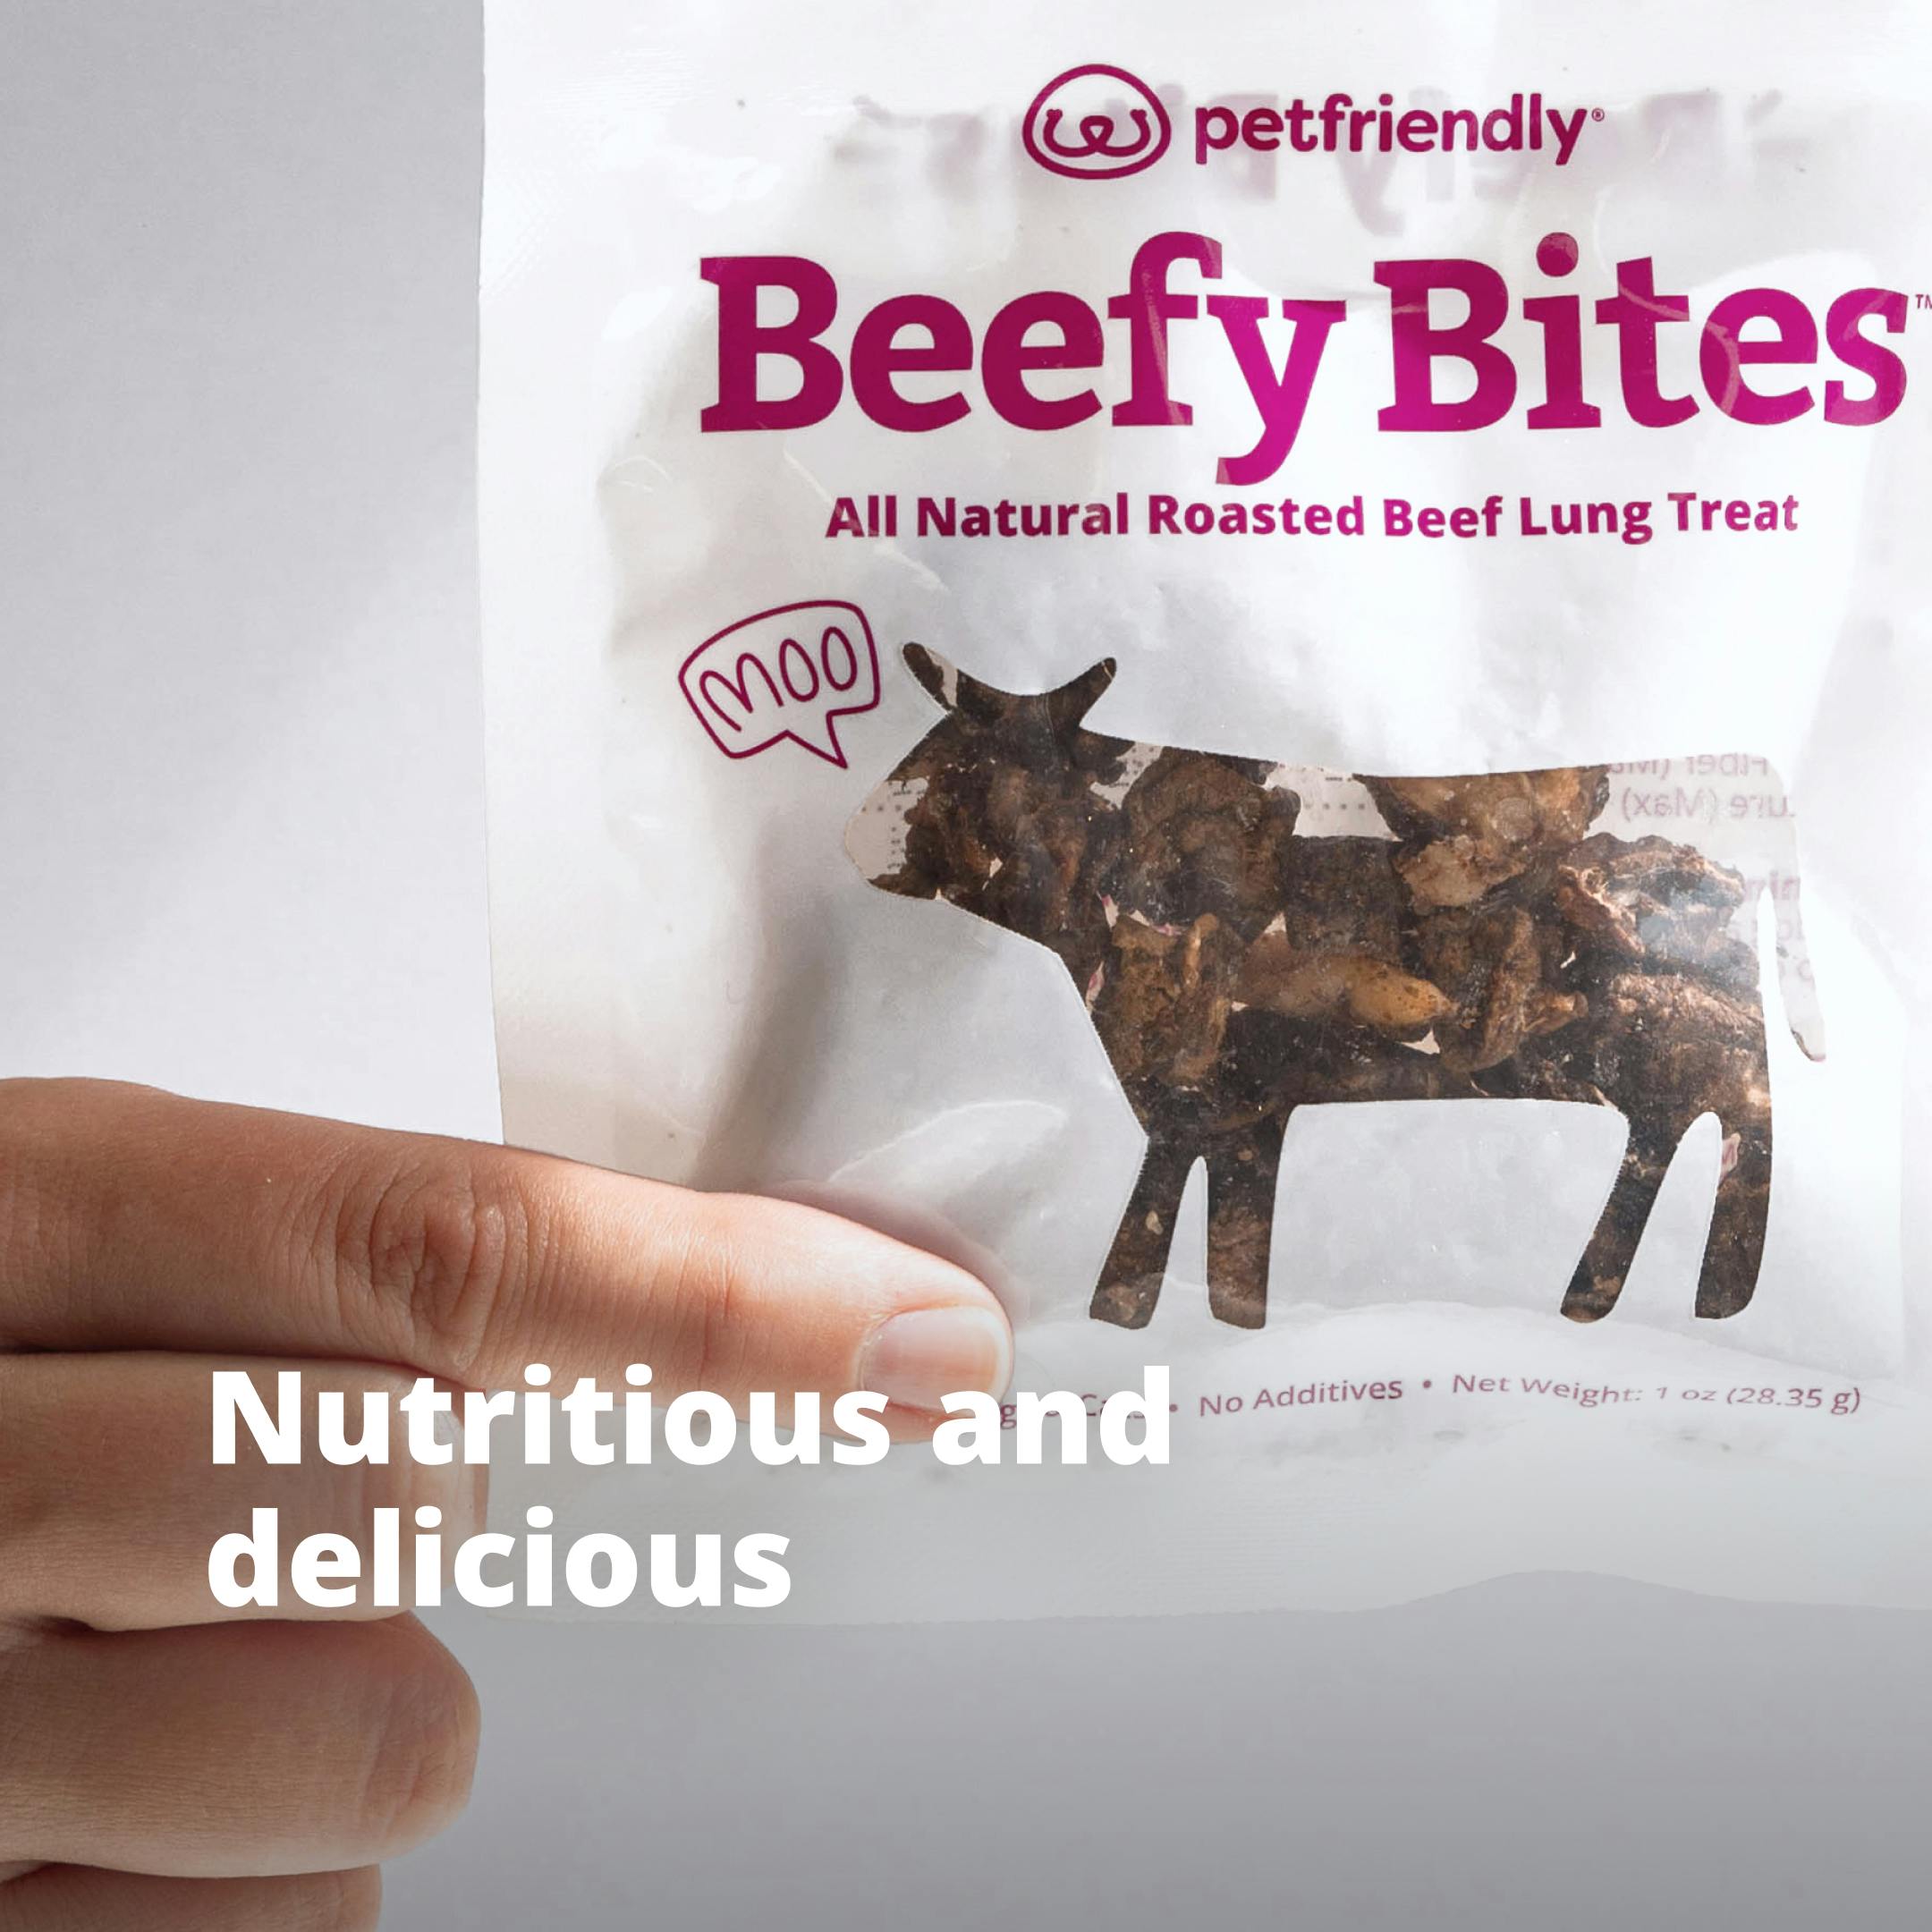 PetFriendly Beefy Bites in Use